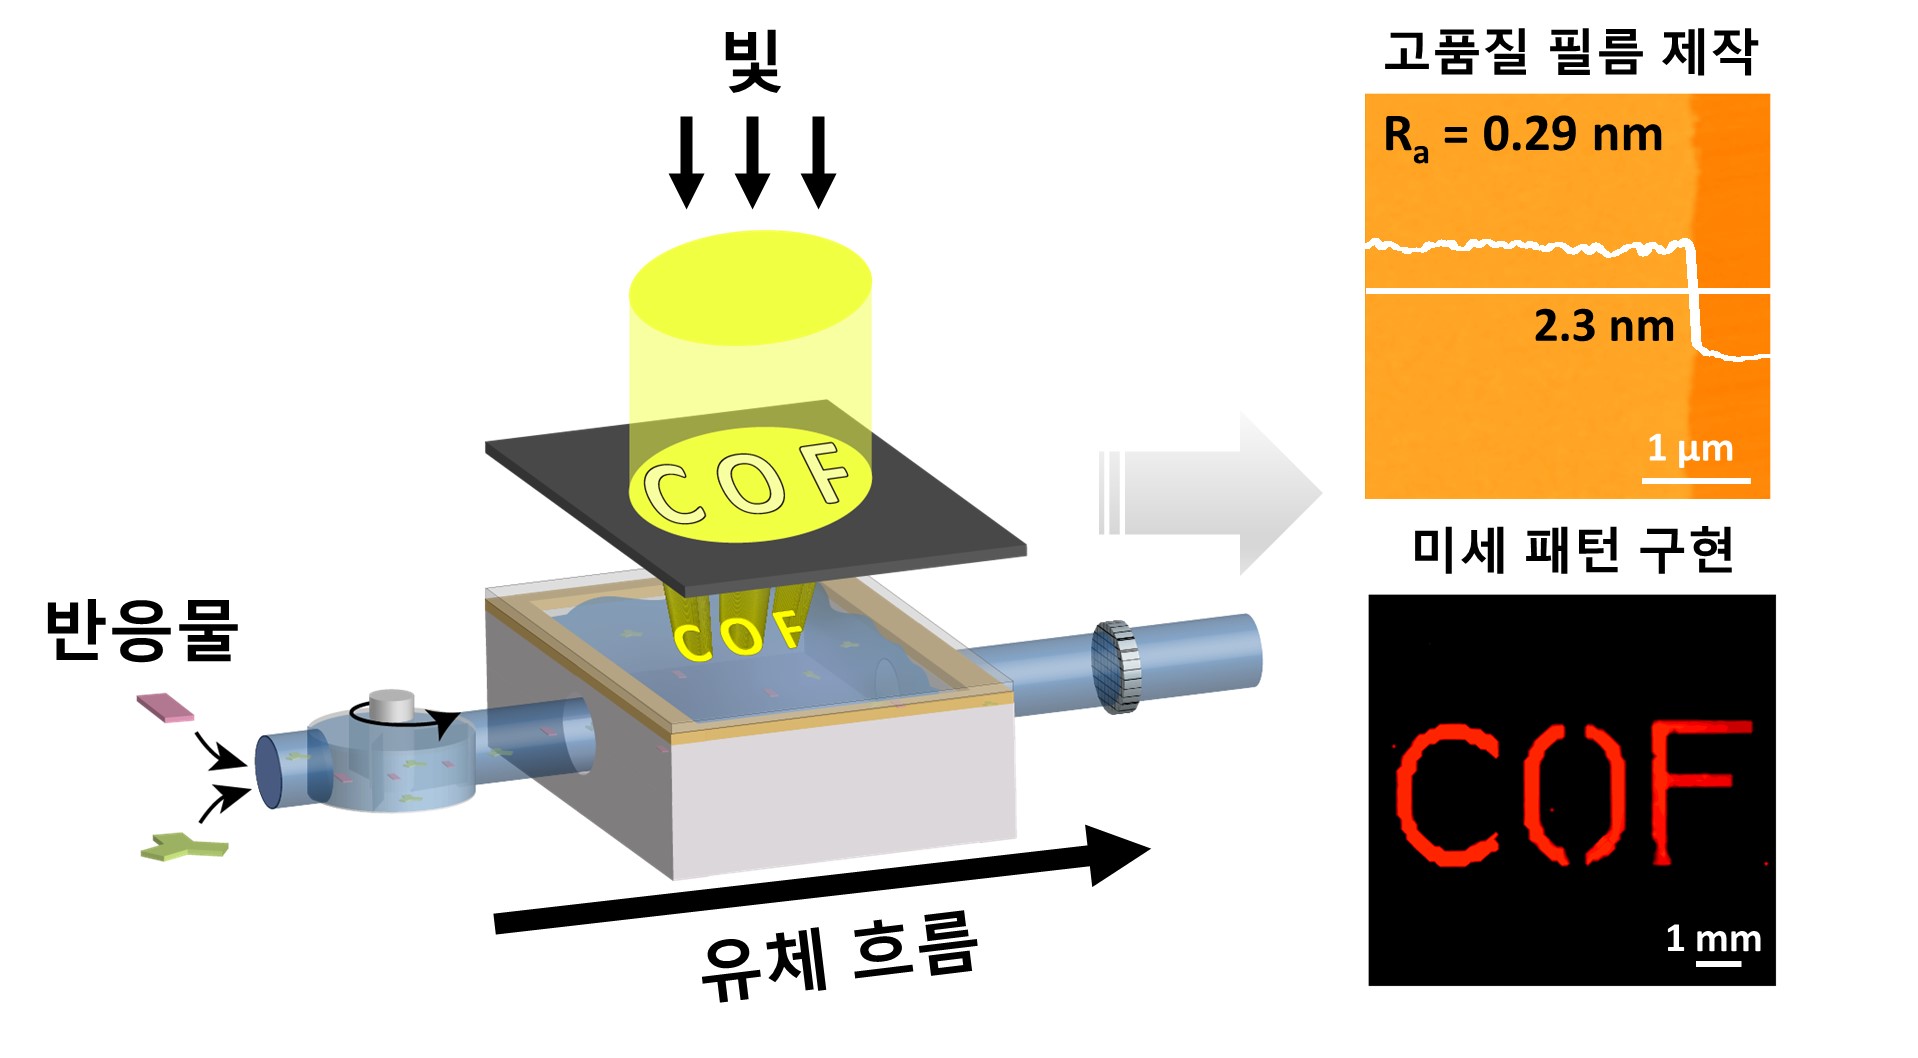 Professor Hyunseob Lim's research team develops innovative 2D covalent organic framework (COF) synthesis technology utilizing light and fluid flow... Opening the possibility of groundbreaking development in optoelectronic devices 이미지